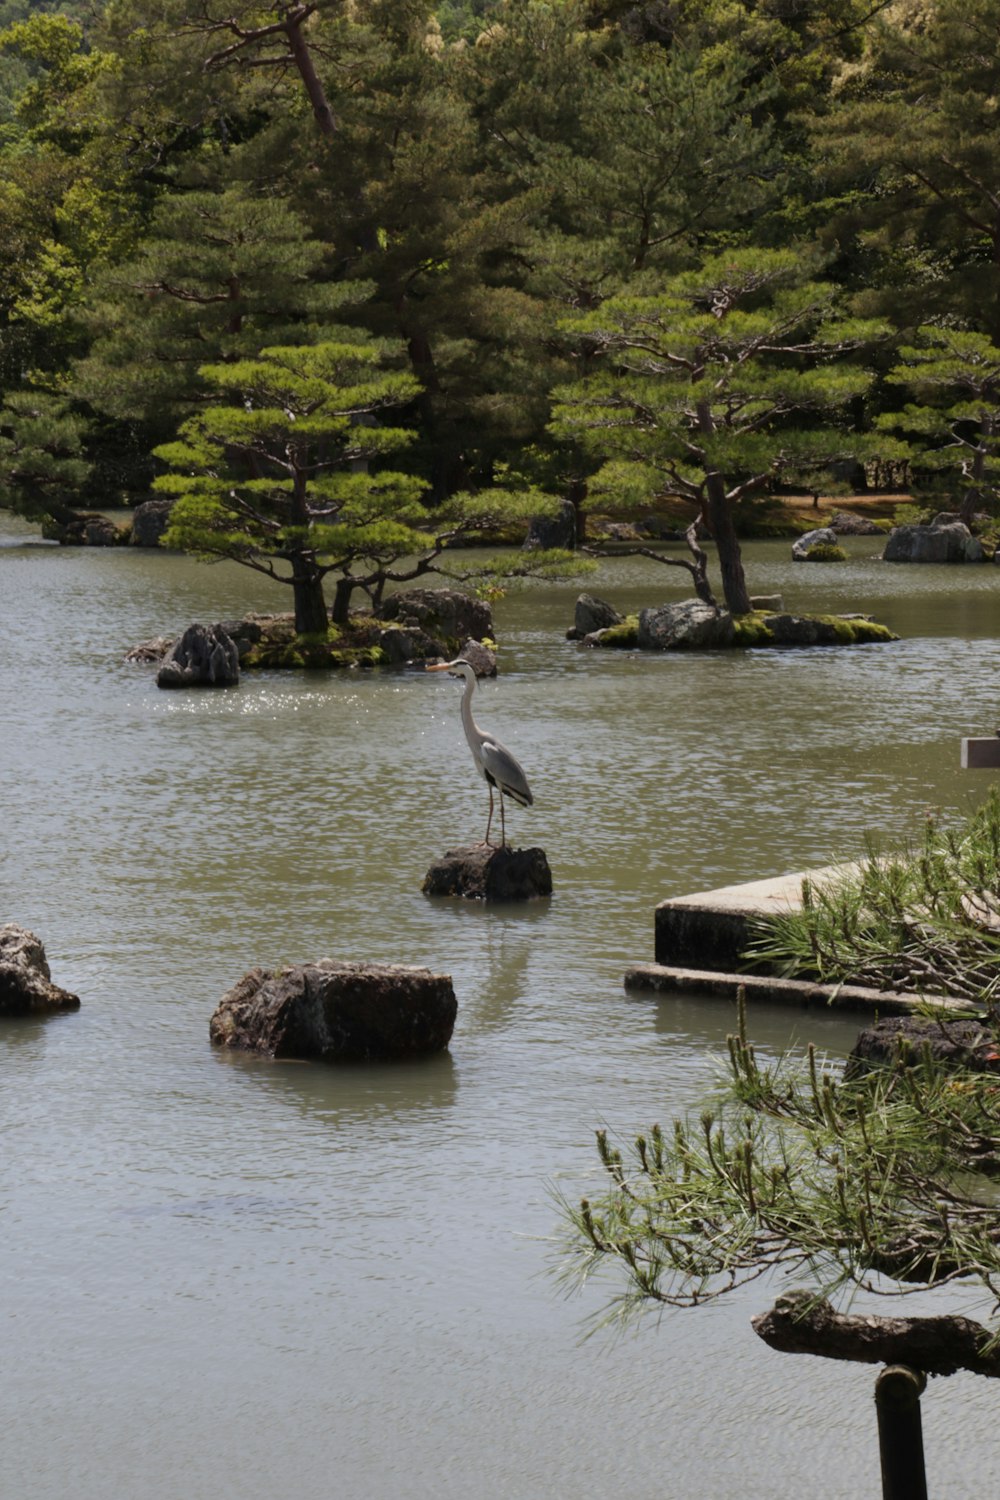 a bird is standing on rocks in the water